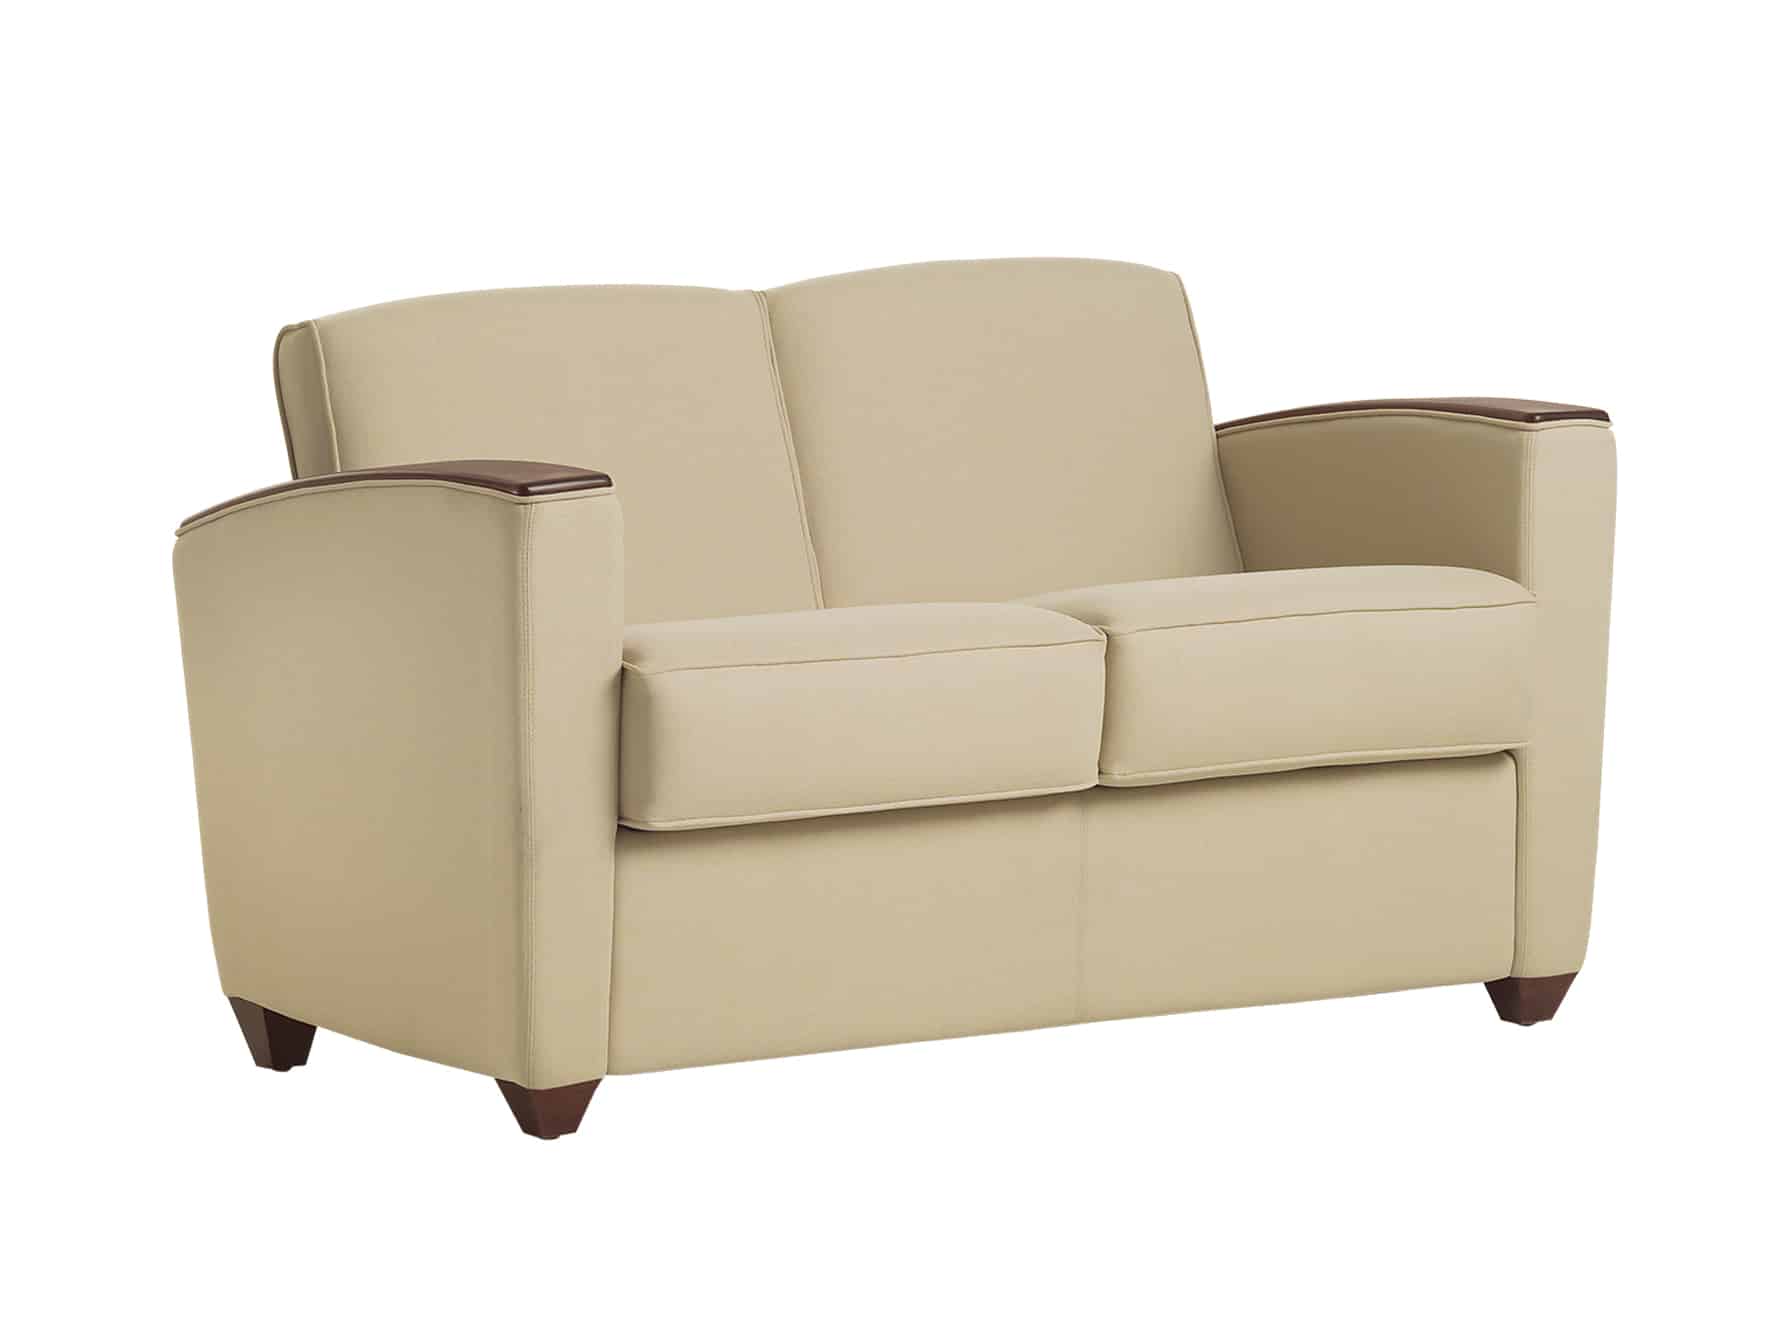 Reflect Loveseat, with Wood Arm Cap and Wood Feet (three quarter view)